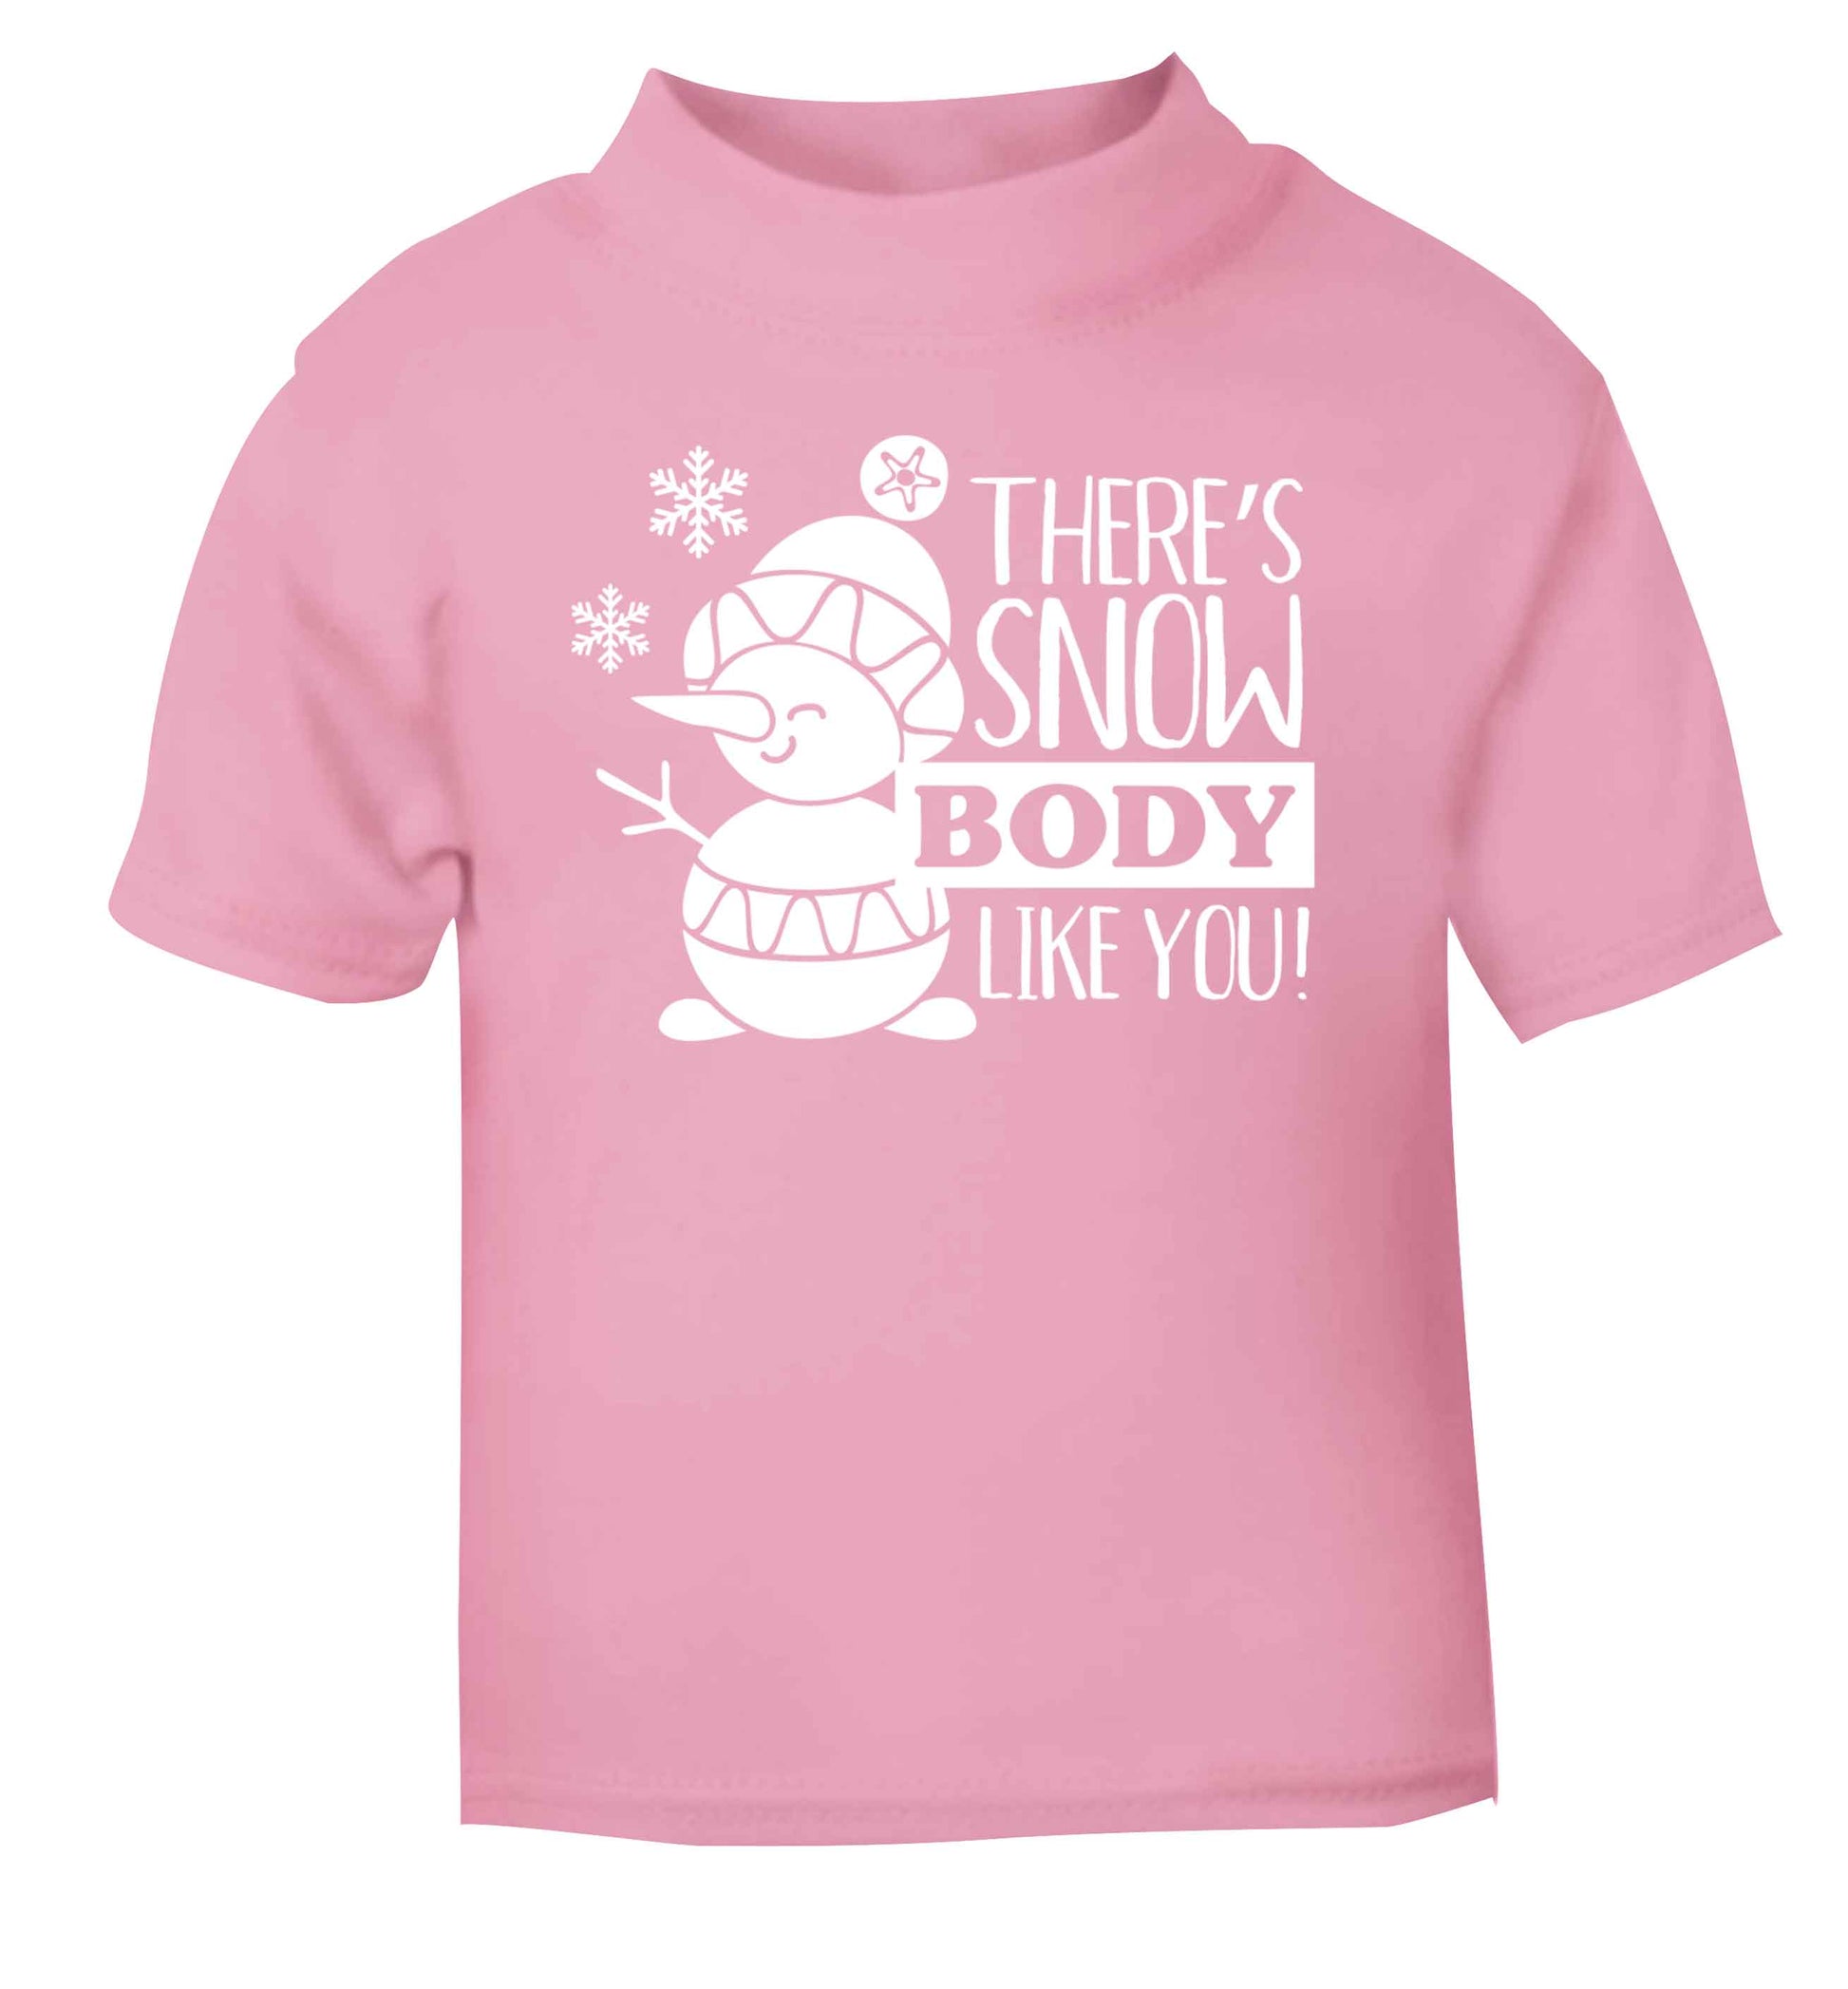 There's snow body like you light pink baby toddler Tshirt 2 Years